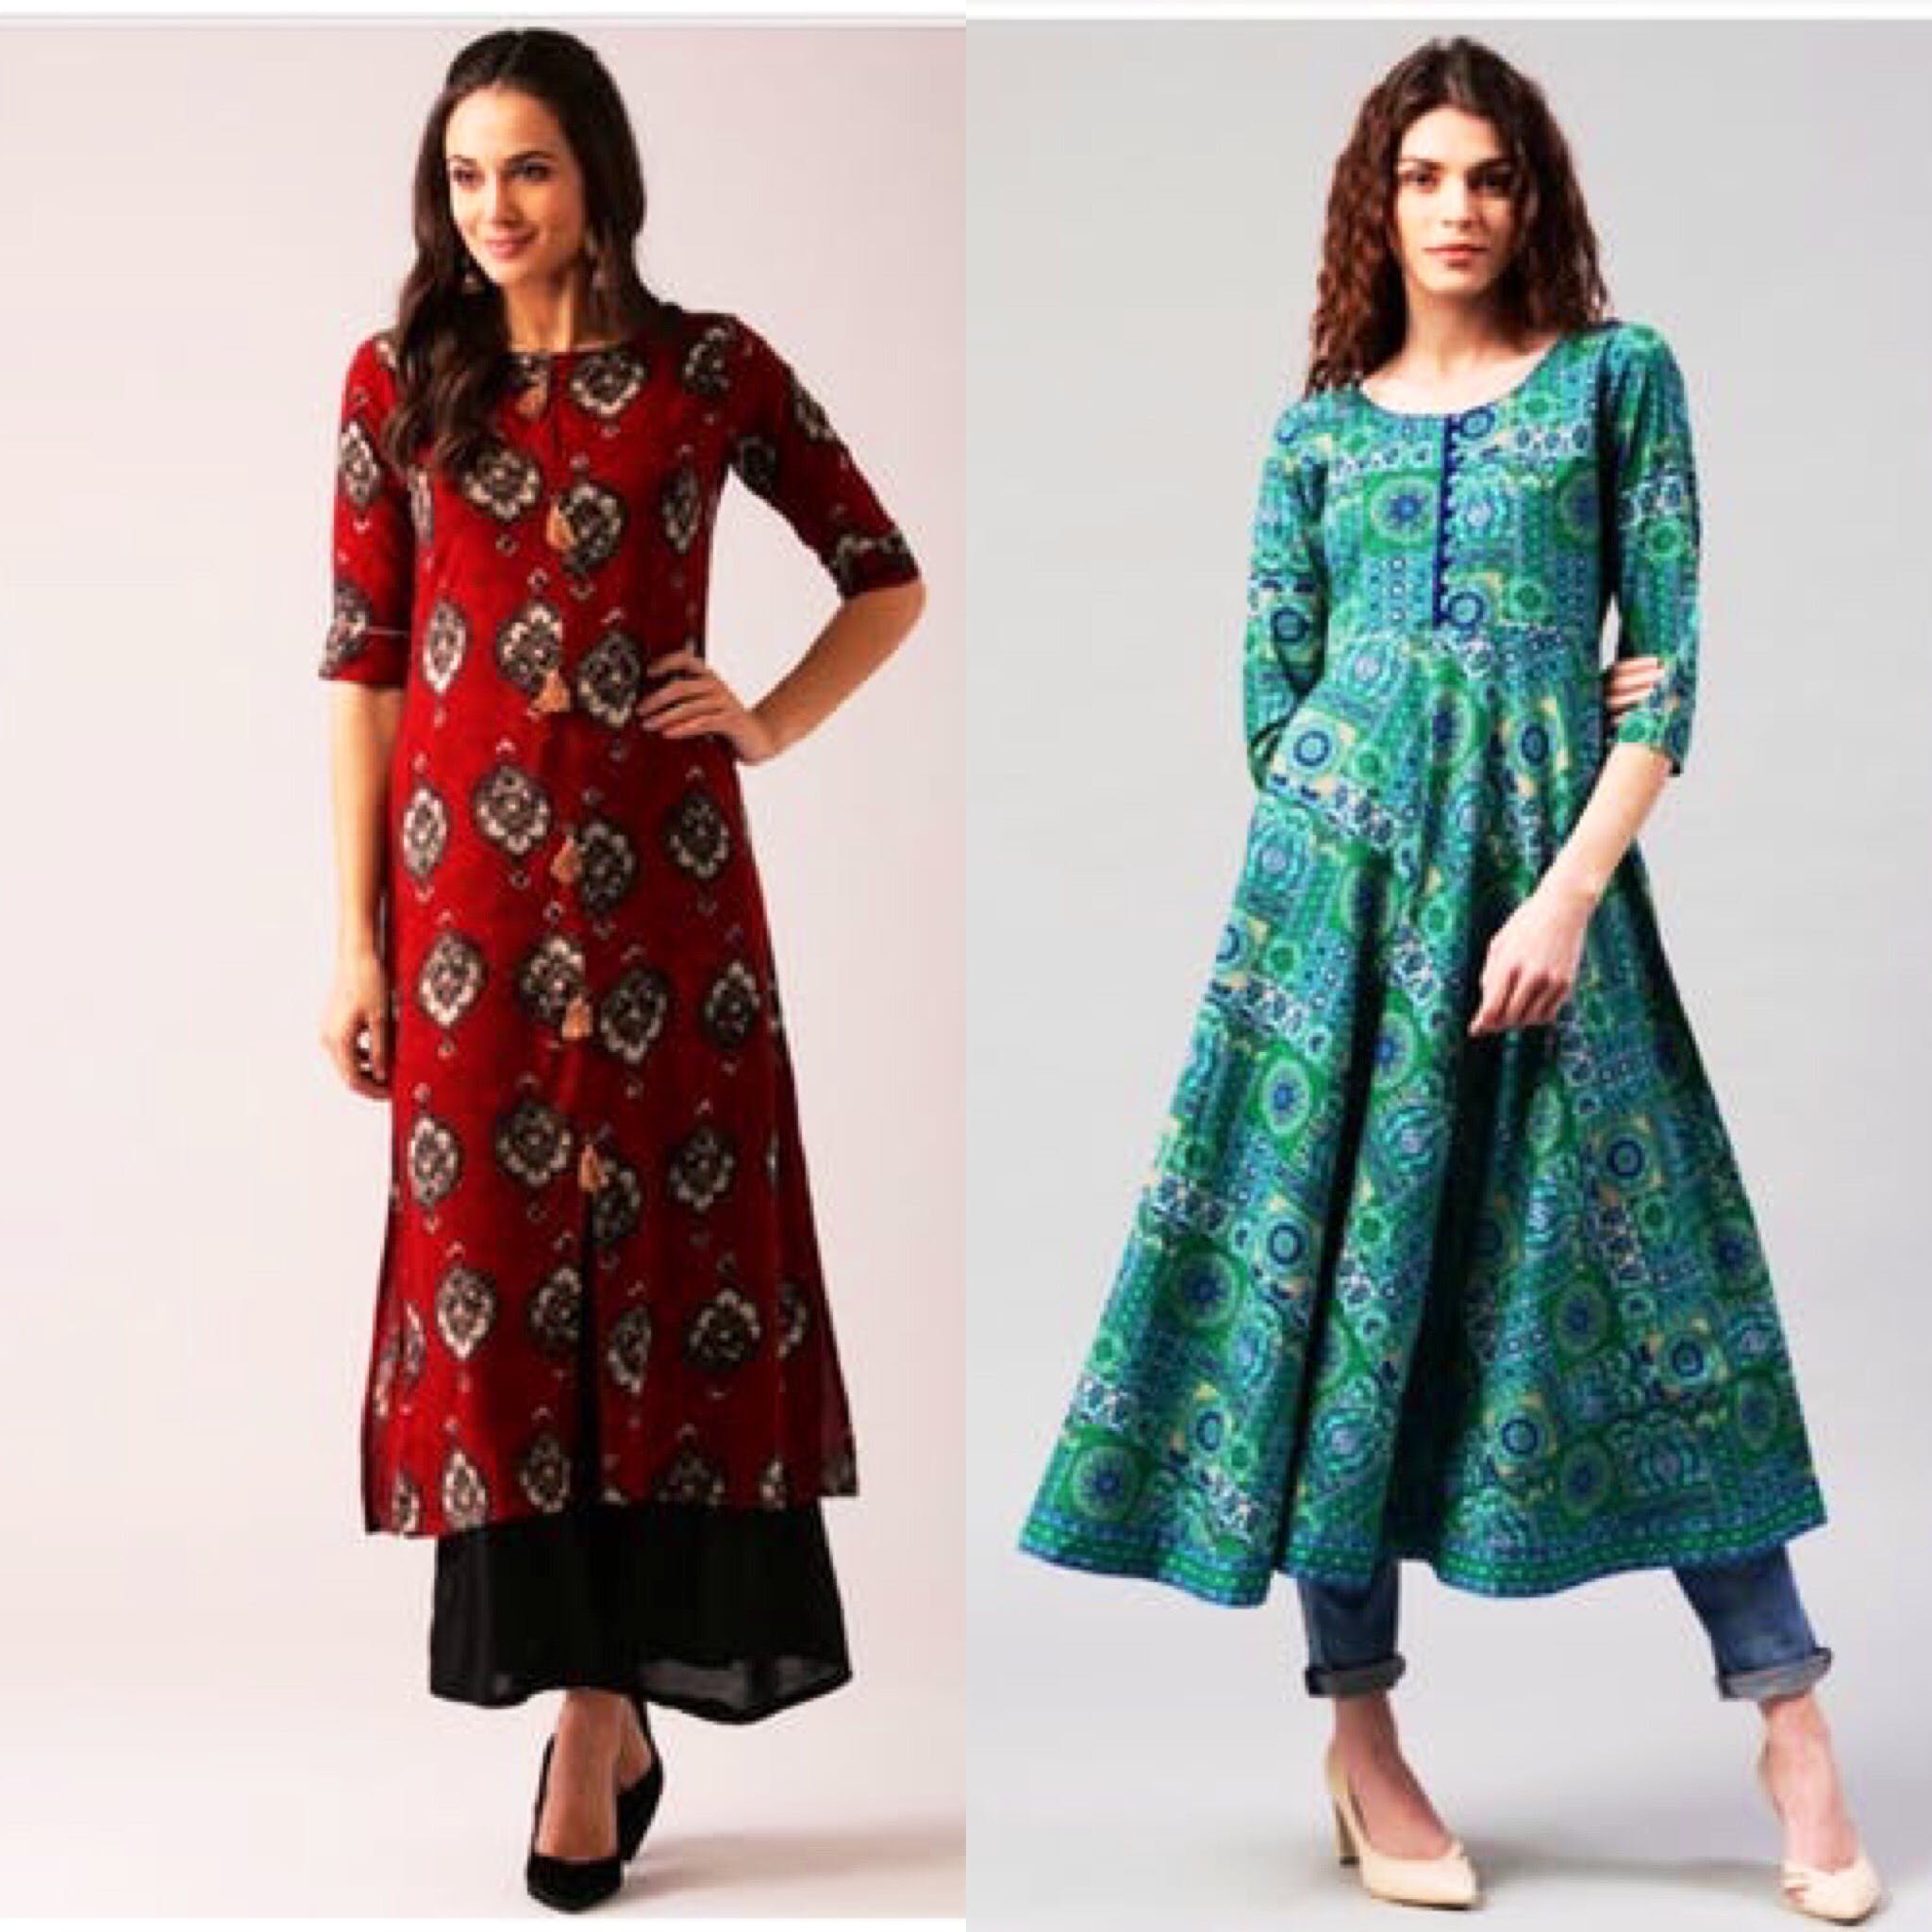 Check Out This Online Store For Fashionable Ethnic Wear At R